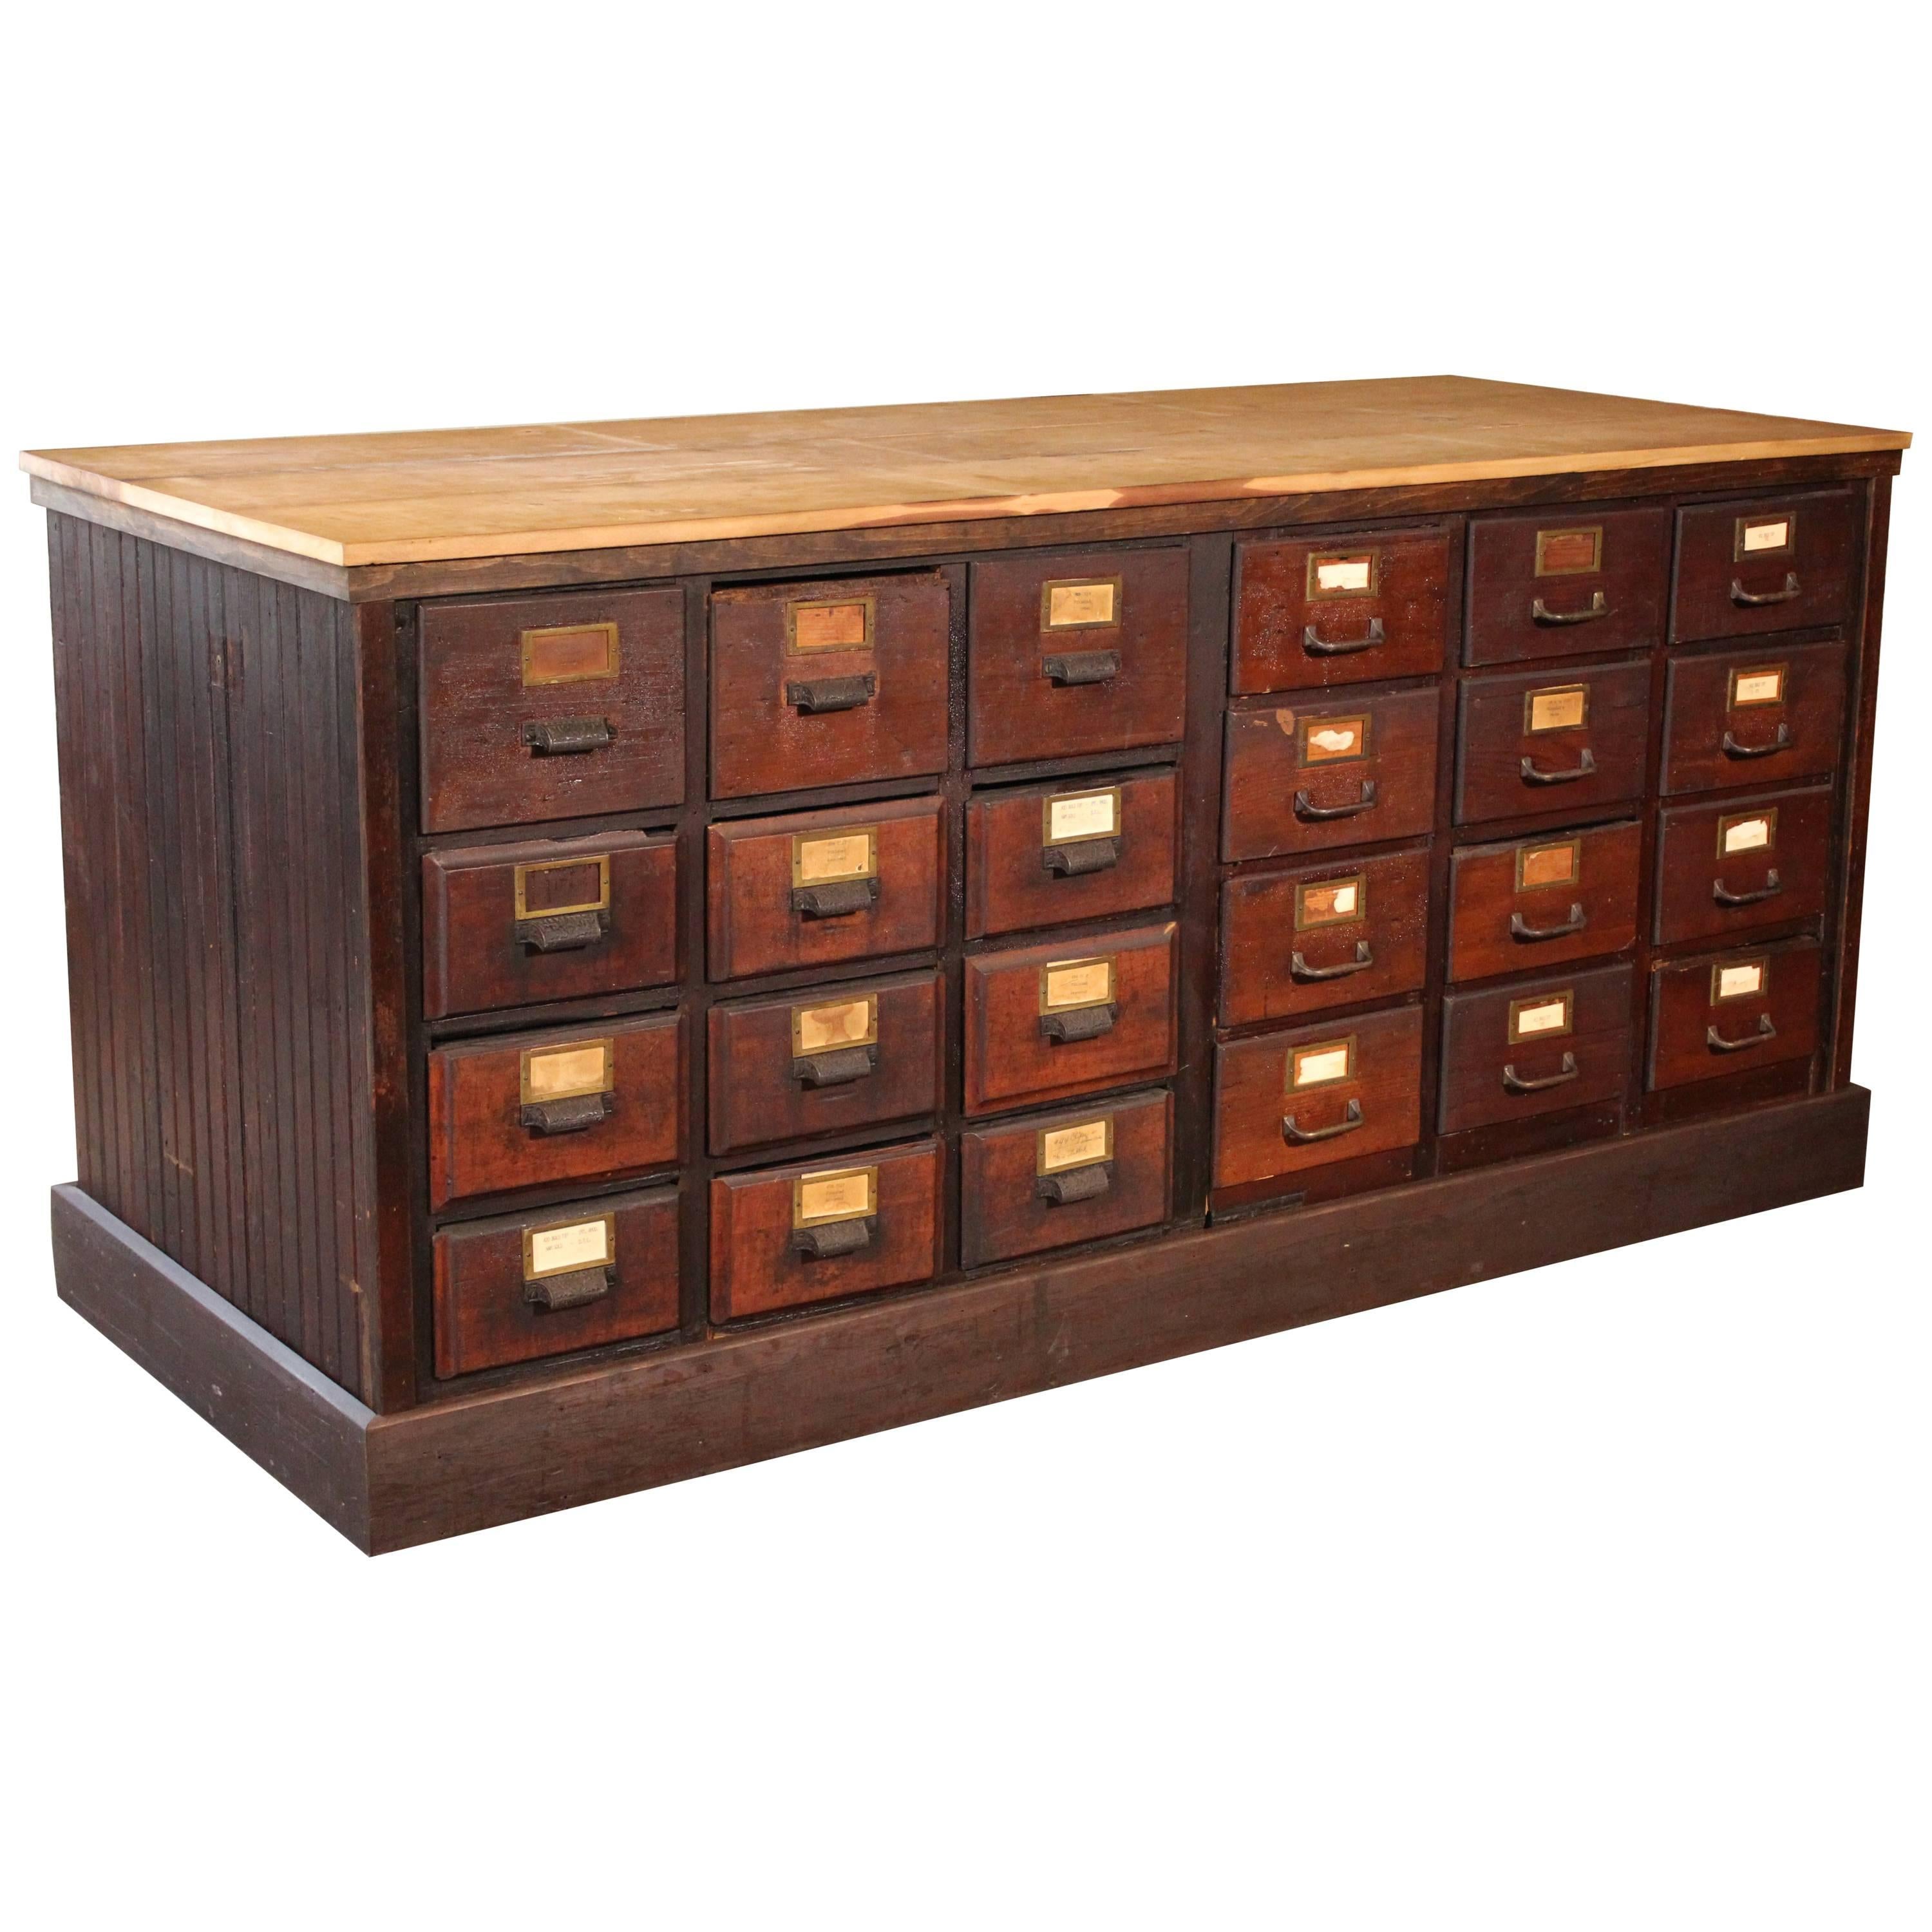 Authentic American Store Counter Multi-Drawer Apothecary Storage Cabinet